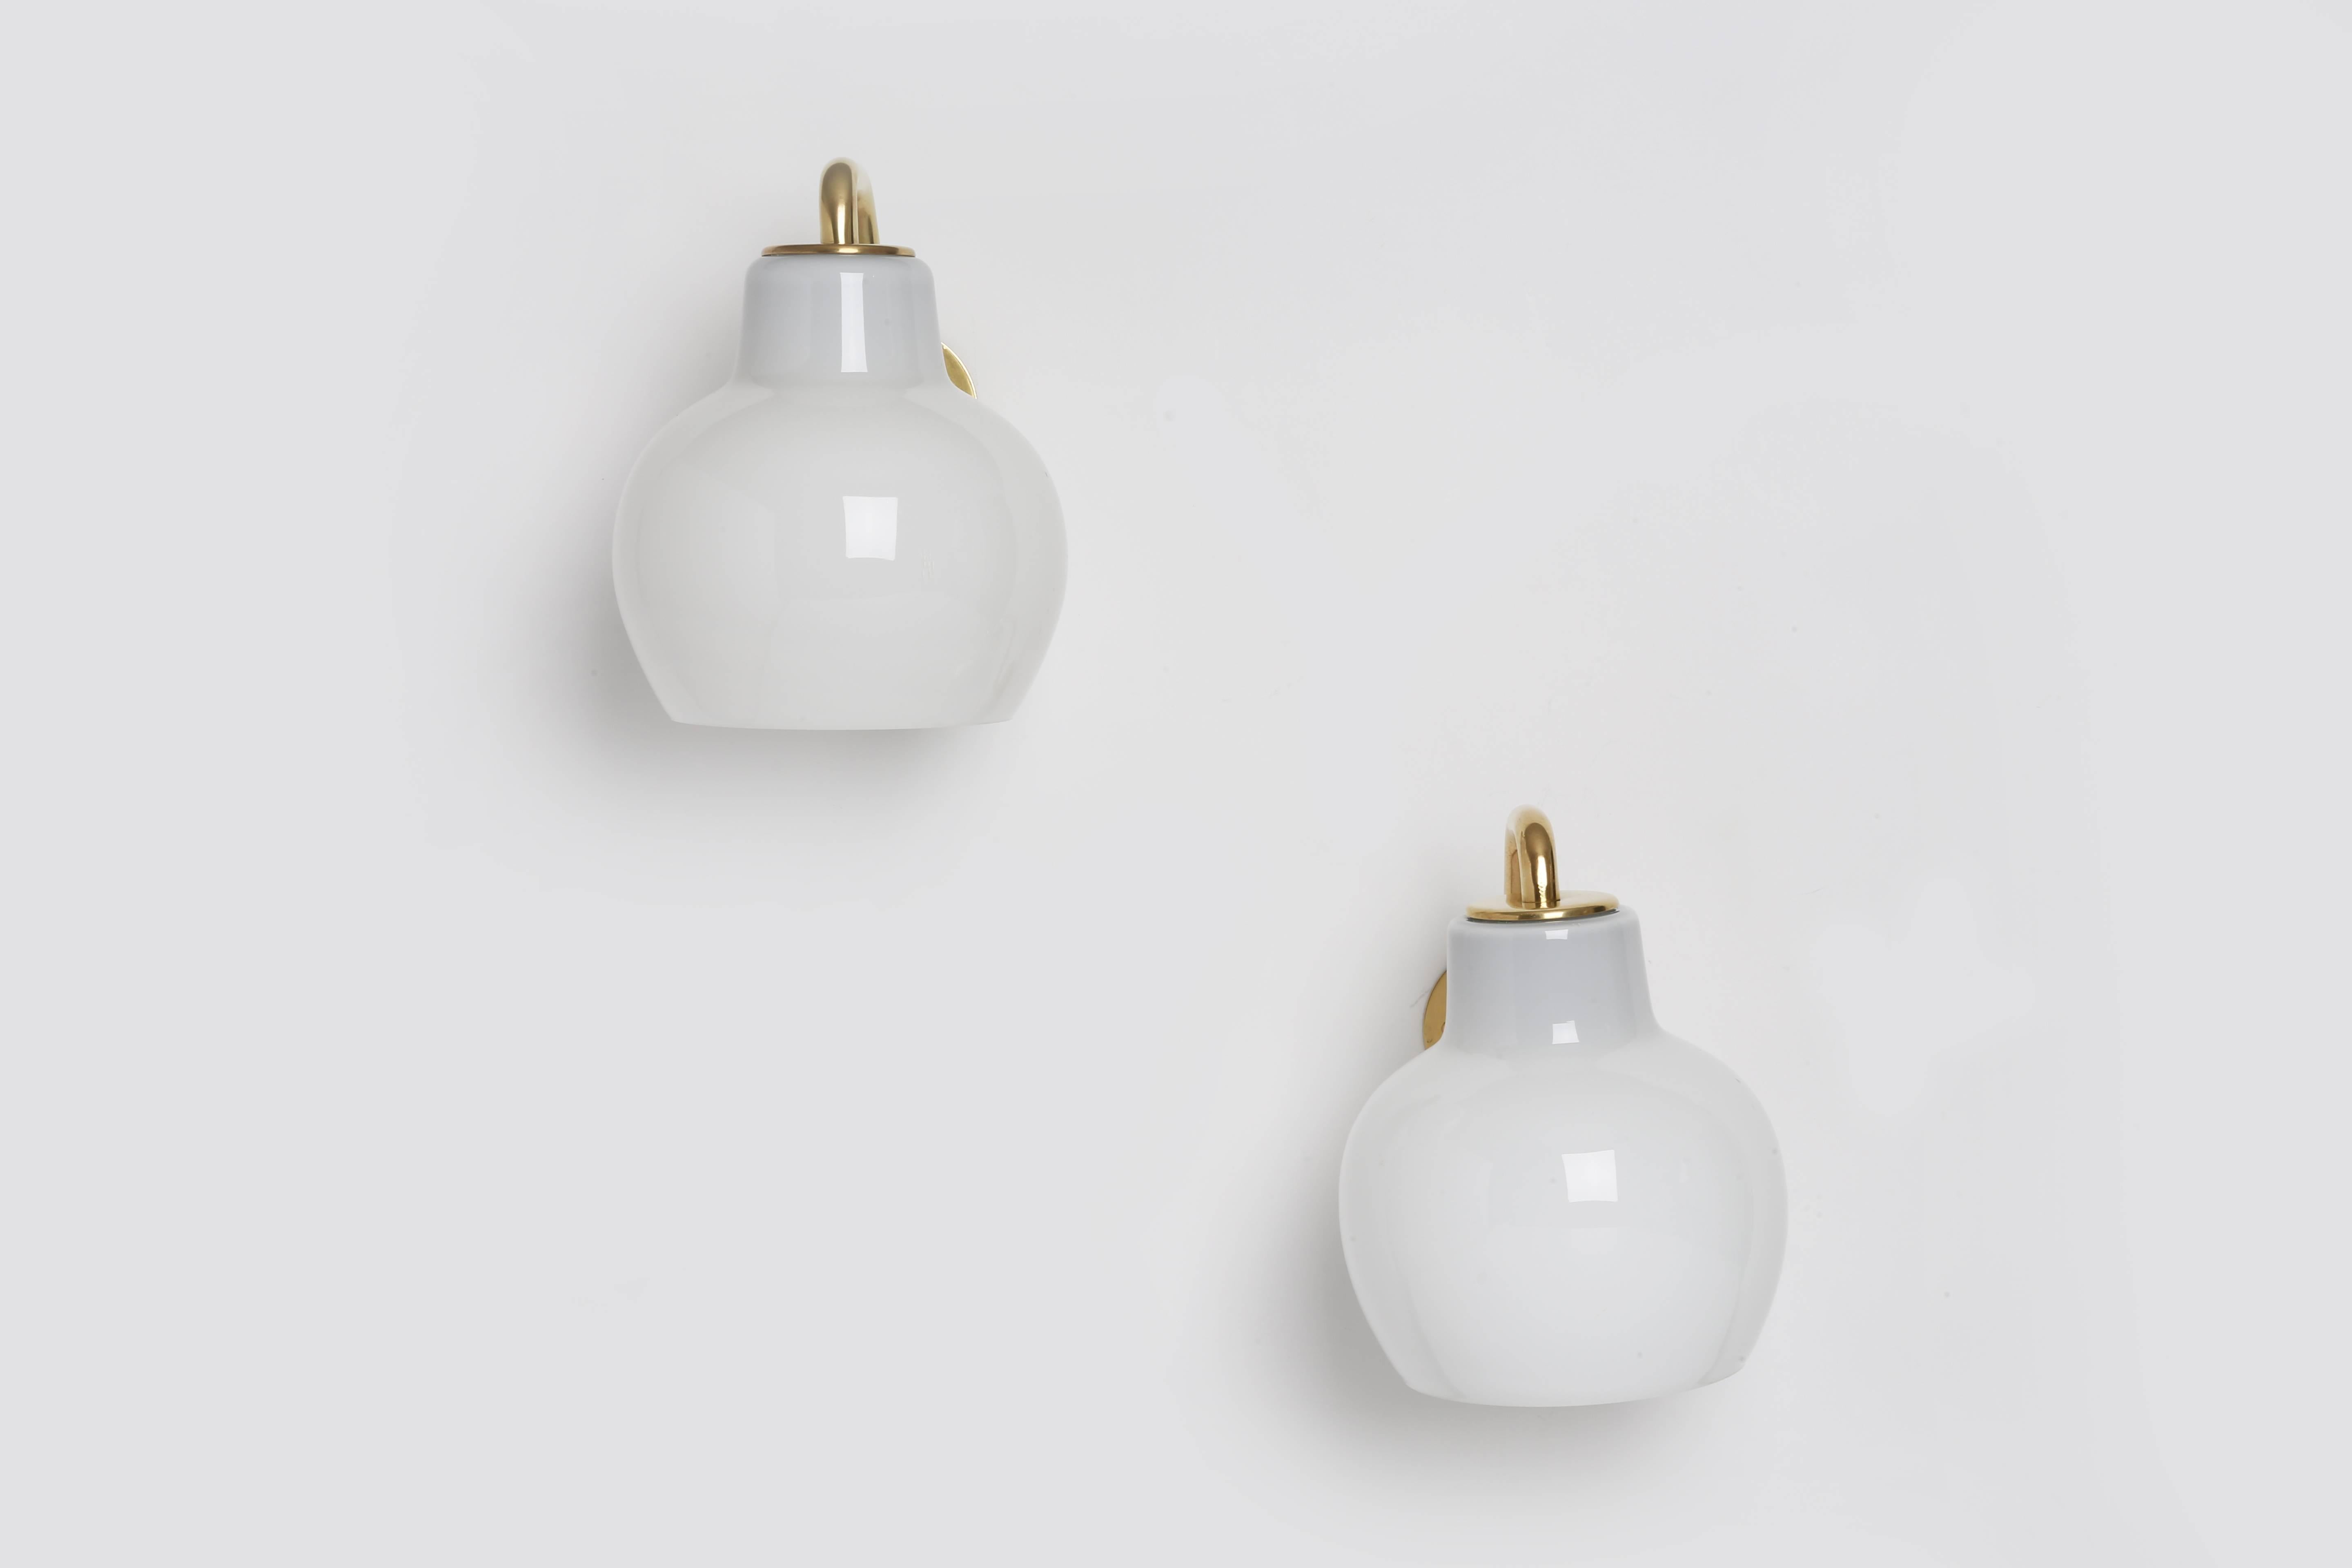 Wall lamps by Vilhelm Lauritzen.
Designed by Danish architect Vilhelm Lauritzen in 1950s for Louis Poulsen.
Made with brass and handmade opaline glass.

Two pairs are available as well as matching chandelier.